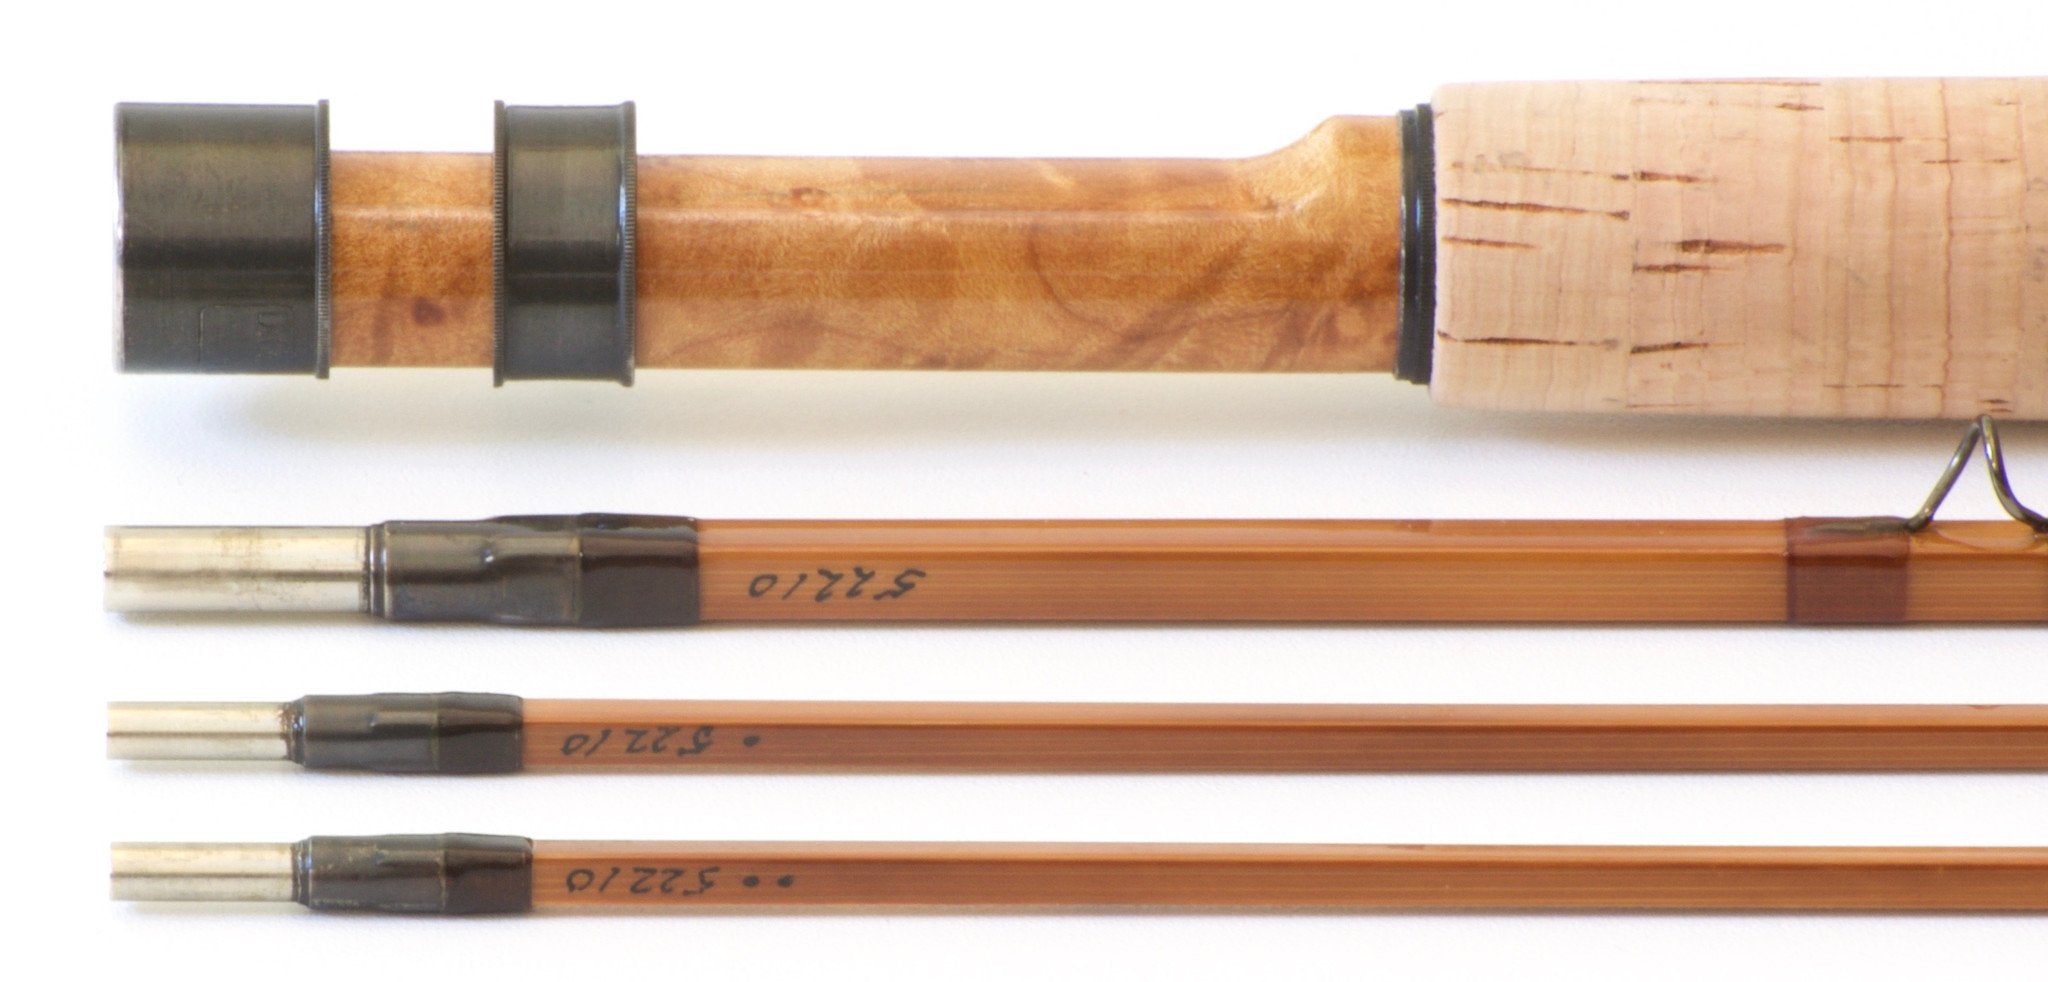 EF Payne Bamboo Fly Rods For Sale Page 2 - Spinoza Rod Company